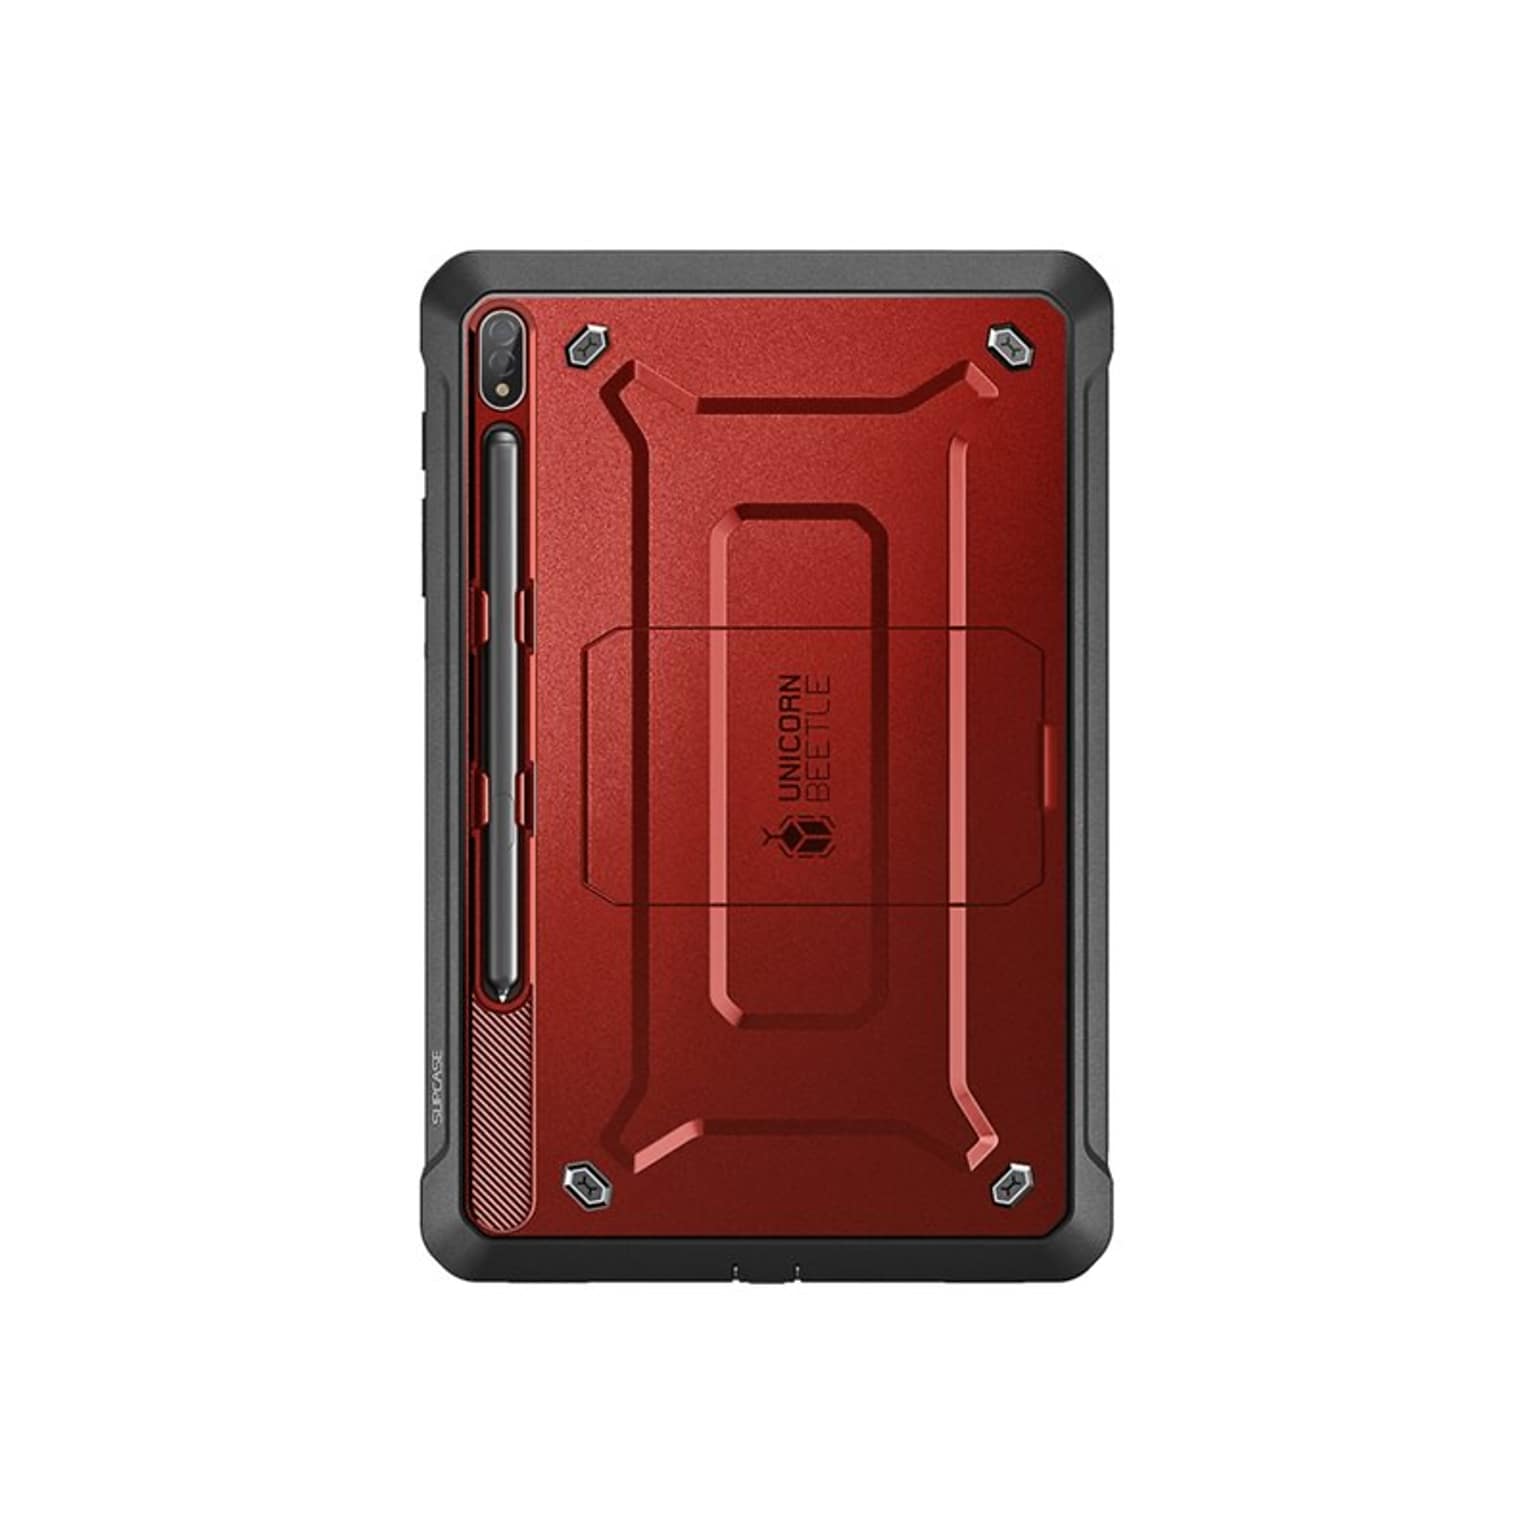 SUPCASE Unicorn Beetle Pro Rugged Case for Galaxy Tab S8 Ultra, Metallic Red (Red SUP-2022TabS8Ultra-14.6-UBPro-SP-Ruddy)